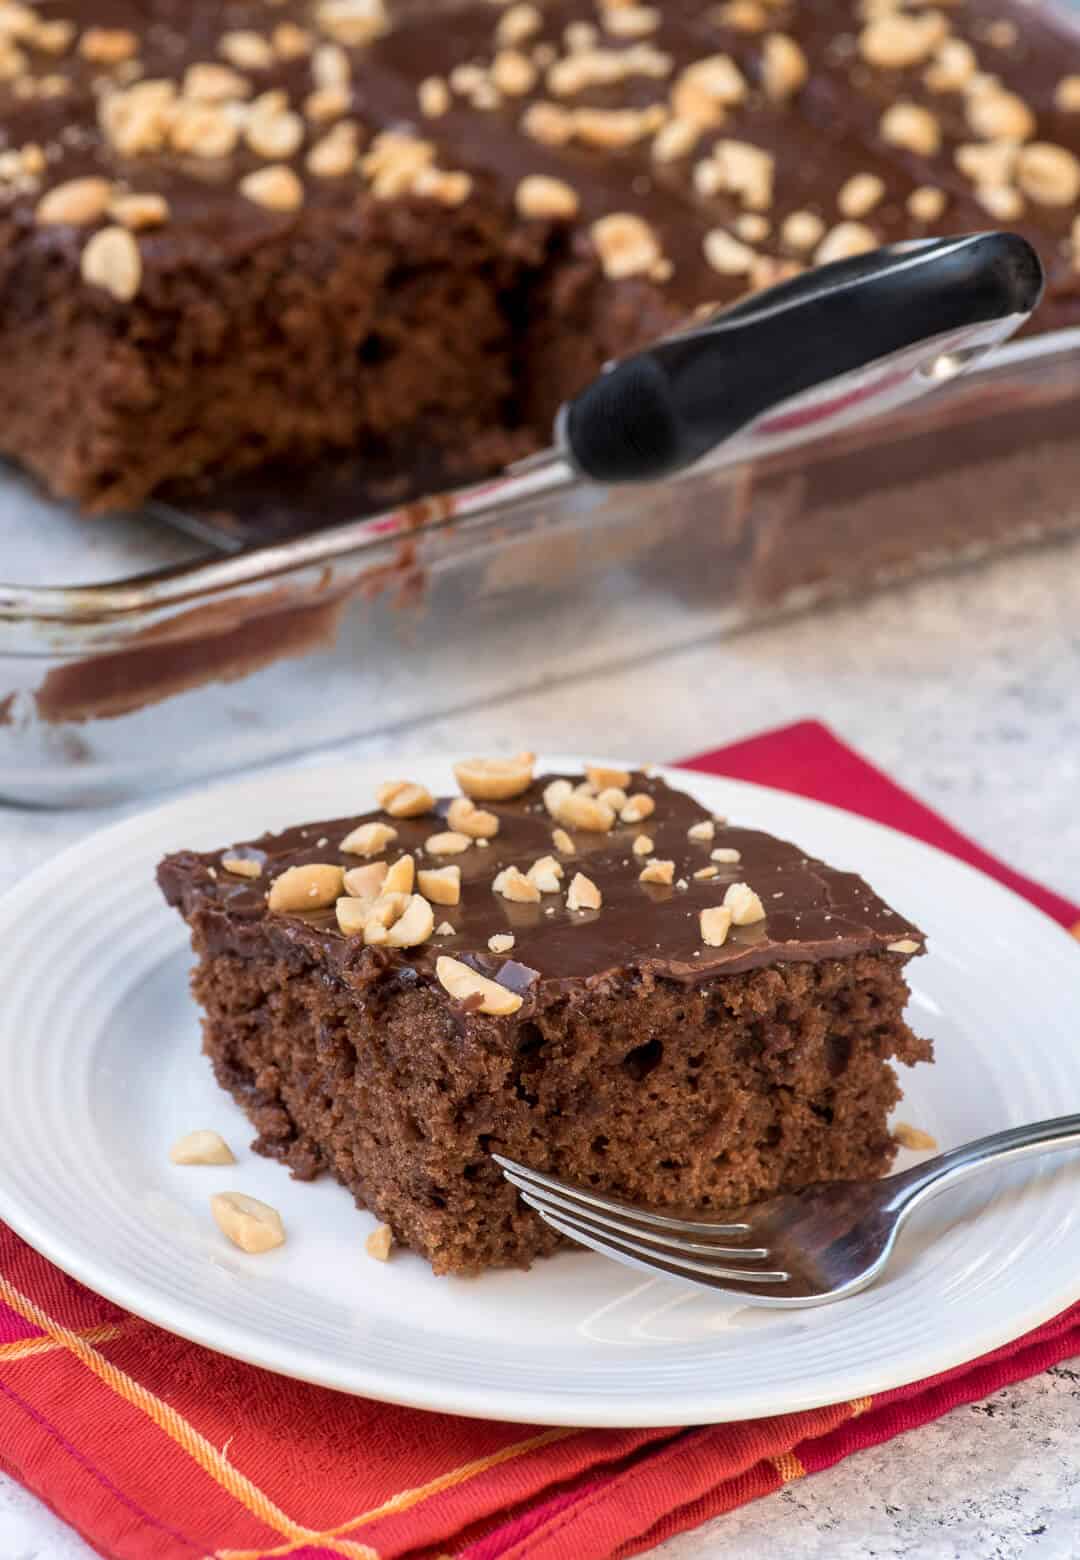 A slice of the Chocolate Peanut Butter Sheet Cake on a white serving plate with a fork placed on a red patterned cloth napkin.